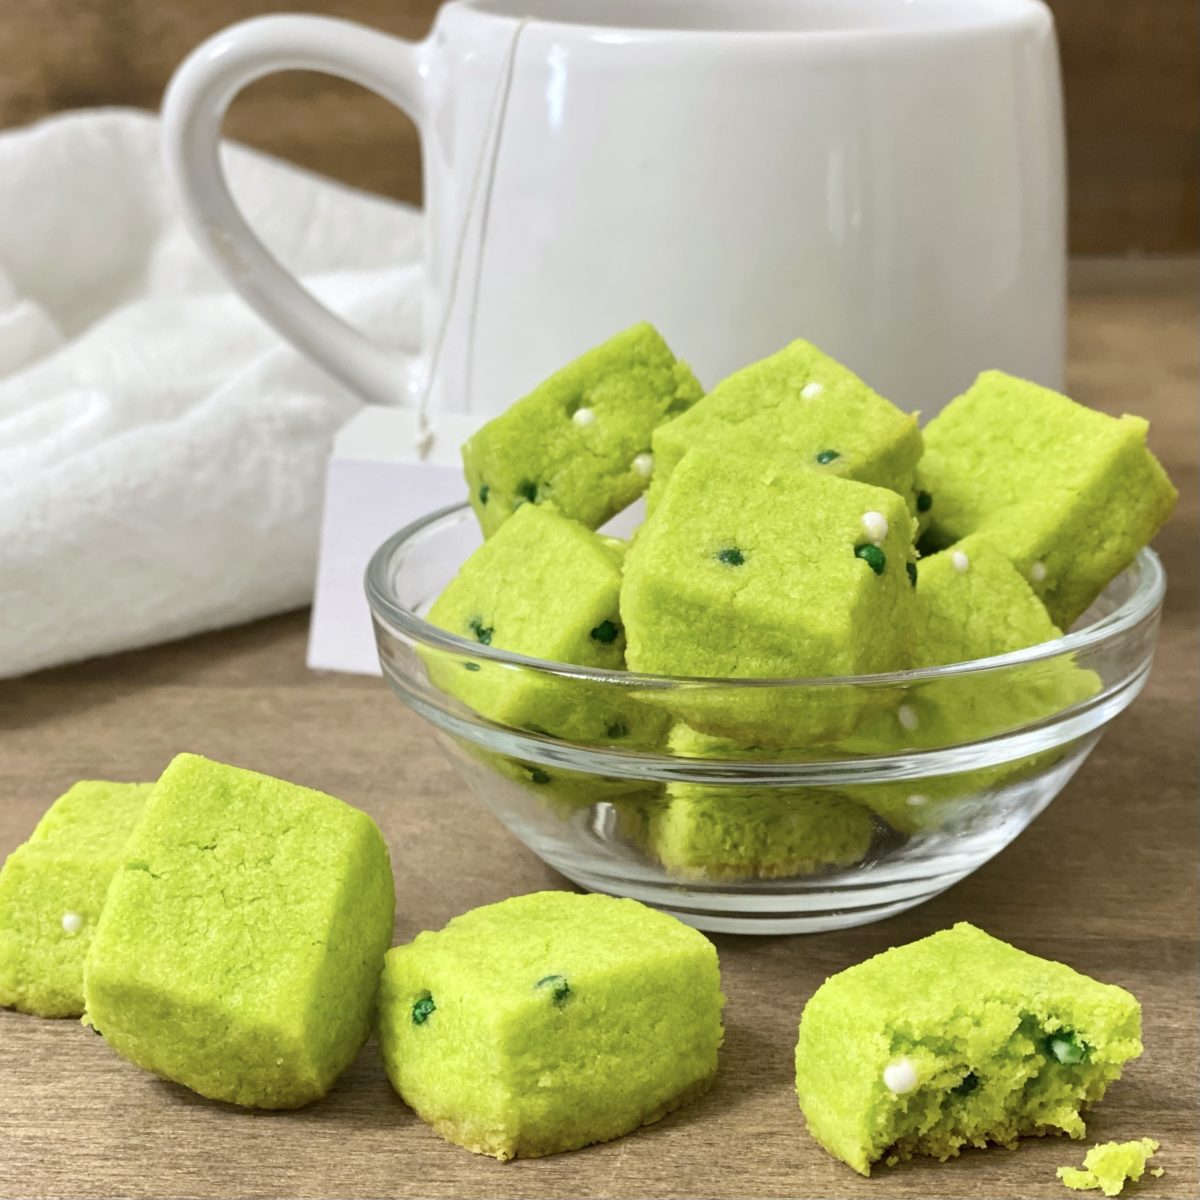 St. Patrick's Day shortbread bites in a bowl with a cup of tea behind them.